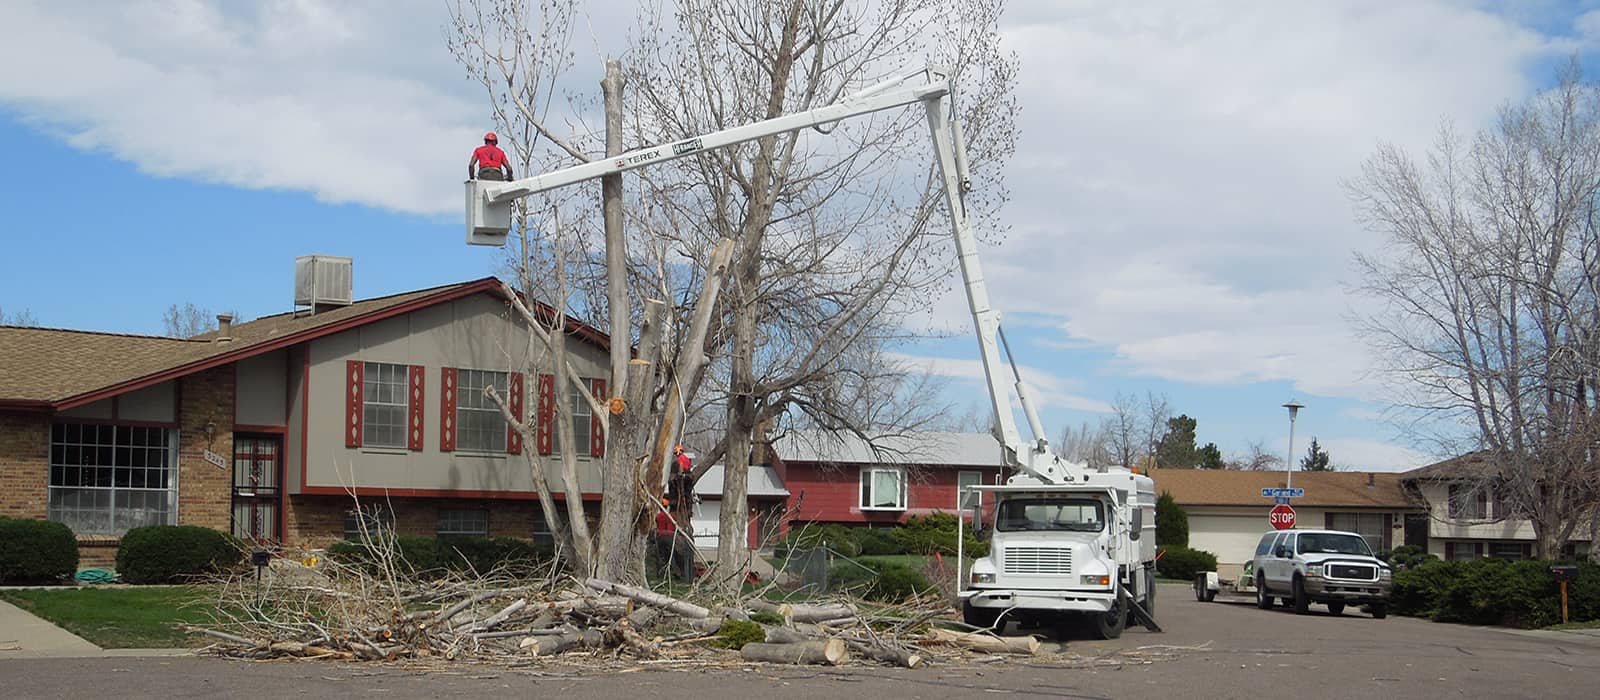 tree service and tree removal pros in Centennial CO